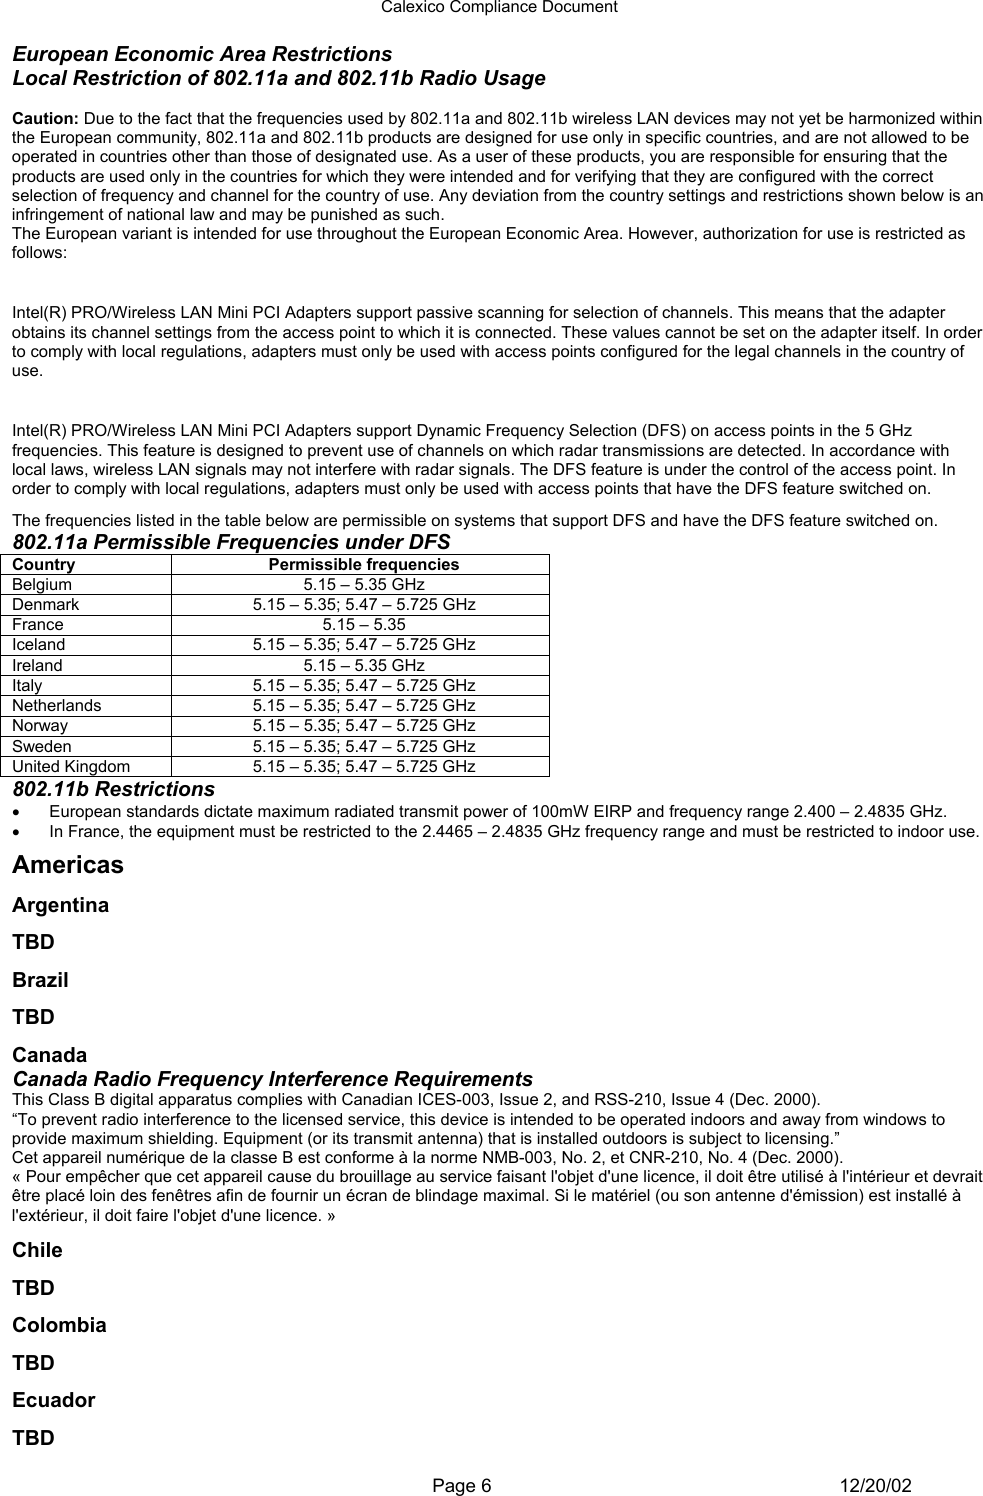 Calexico Compliance Document  Page 6 12/20/02 European Economic Area Restrictions Local Restriction of 802.11a and 802.11b Radio Usage  Caution: Due to the fact that the frequencies used by 802.11a and 802.11b wireless LAN devices may not yet be harmonized within the European community, 802.11a and 802.11b products are designed for use only in specific countries, and are not allowed to be operated in countries other than those of designated use. As a user of these products, you are responsible for ensuring that the products are used only in the countries for which they were intended and for verifying that they are configured with the correct selection of frequency and channel for the country of use. Any deviation from the country settings and restrictions shown below is an infringement of national law and may be punished as such. The European variant is intended for use throughout the European Economic Area. However, authorization for use is restricted as follows: Passive Scanning Adapters and Access Points Intel(R) PRO/Wireless LAN Mini PCI Adapters support passive scanning for selection of channels. This means that the adapter obtains its channel settings from the access point to which it is connected. These values cannot be set on the adapter itself. In order to comply with local regulations, adapters must only be used with access points configured for the legal channels in the country of use. Dynamic Frequency Selection (DFS) Intel(R) PRO/Wireless LAN Mini PCI Adapters support Dynamic Frequency Selection (DFS) on access points in the 5 GHz frequencies. This feature is designed to prevent use of channels on which radar transmissions are detected. In accordance with local laws, wireless LAN signals may not interfere with radar signals. The DFS feature is under the control of the access point. In order to comply with local regulations, adapters must only be used with access points that have the DFS feature switched on. The frequencies listed in the table below are permissible on systems that support DFS and have the DFS feature switched on. 802.11a Permissible Frequencies under DFS Country Permissible frequencies Belgium  5.15 – 5.35 GHz Denmark  5.15 – 5.35; 5.47 – 5.725 GHz France  5.15 – 5.35 Iceland  5.15 – 5.35; 5.47 – 5.725 GHz Ireland  5.15 – 5.35 GHz Italy  5.15 – 5.35; 5.47 – 5.725 GHz Netherlands  5.15 – 5.35; 5.47 – 5.725 GHz Norway  5.15 – 5.35; 5.47 – 5.725 GHz Sweden  5.15 – 5.35; 5.47 – 5.725 GHz United Kingdom  5.15 – 5.35; 5.47 – 5.725 GHz 802.11b Restrictions •  European standards dictate maximum radiated transmit power of 100mW EIRP and frequency range 2.400 – 2.4835 GHz. •  In France, the equipment must be restricted to the 2.4465 – 2.4835 GHz frequency range and must be restricted to indoor use. Americas Argentina TBD Brazil TBD Canada Canada Radio Frequency Interference Requirements This Class B digital apparatus complies with Canadian ICES-003, Issue 2, and RSS-210, Issue 4 (Dec. 2000). “To prevent radio interference to the licensed service, this device is intended to be operated indoors and away from windows to provide maximum shielding. Equipment (or its transmit antenna) that is installed outdoors is subject to licensing.” Cet appareil numérique de la classe B est conforme à la norme NMB-003, No. 2, et CNR-210, No. 4 (Dec. 2000). « Pour empêcher que cet appareil cause du brouillage au service faisant l&apos;objet d&apos;une licence, il doit être utilisé à l&apos;intérieur et devrait être placé loin des fenêtres afin de fournir un écran de blindage maximal. Si le matériel (ou son antenne d&apos;émission) est installé à l&apos;extérieur, il doit faire l&apos;objet d&apos;une licence. » Chile TBD Colombia TBD Ecuador TBD 